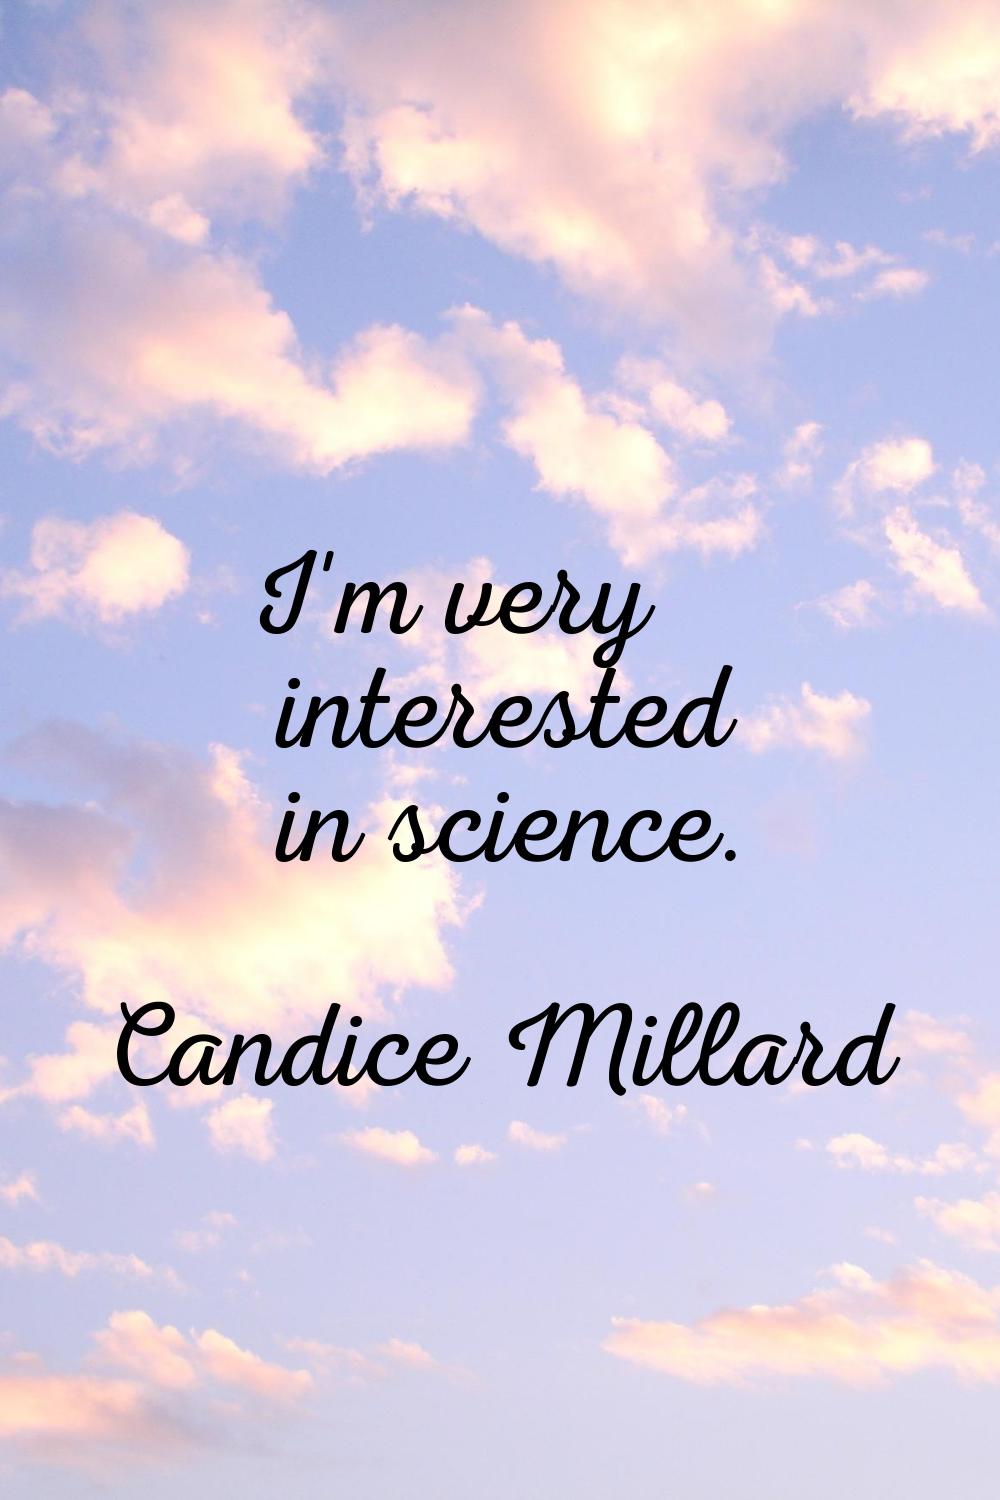 I'm very interested in science.